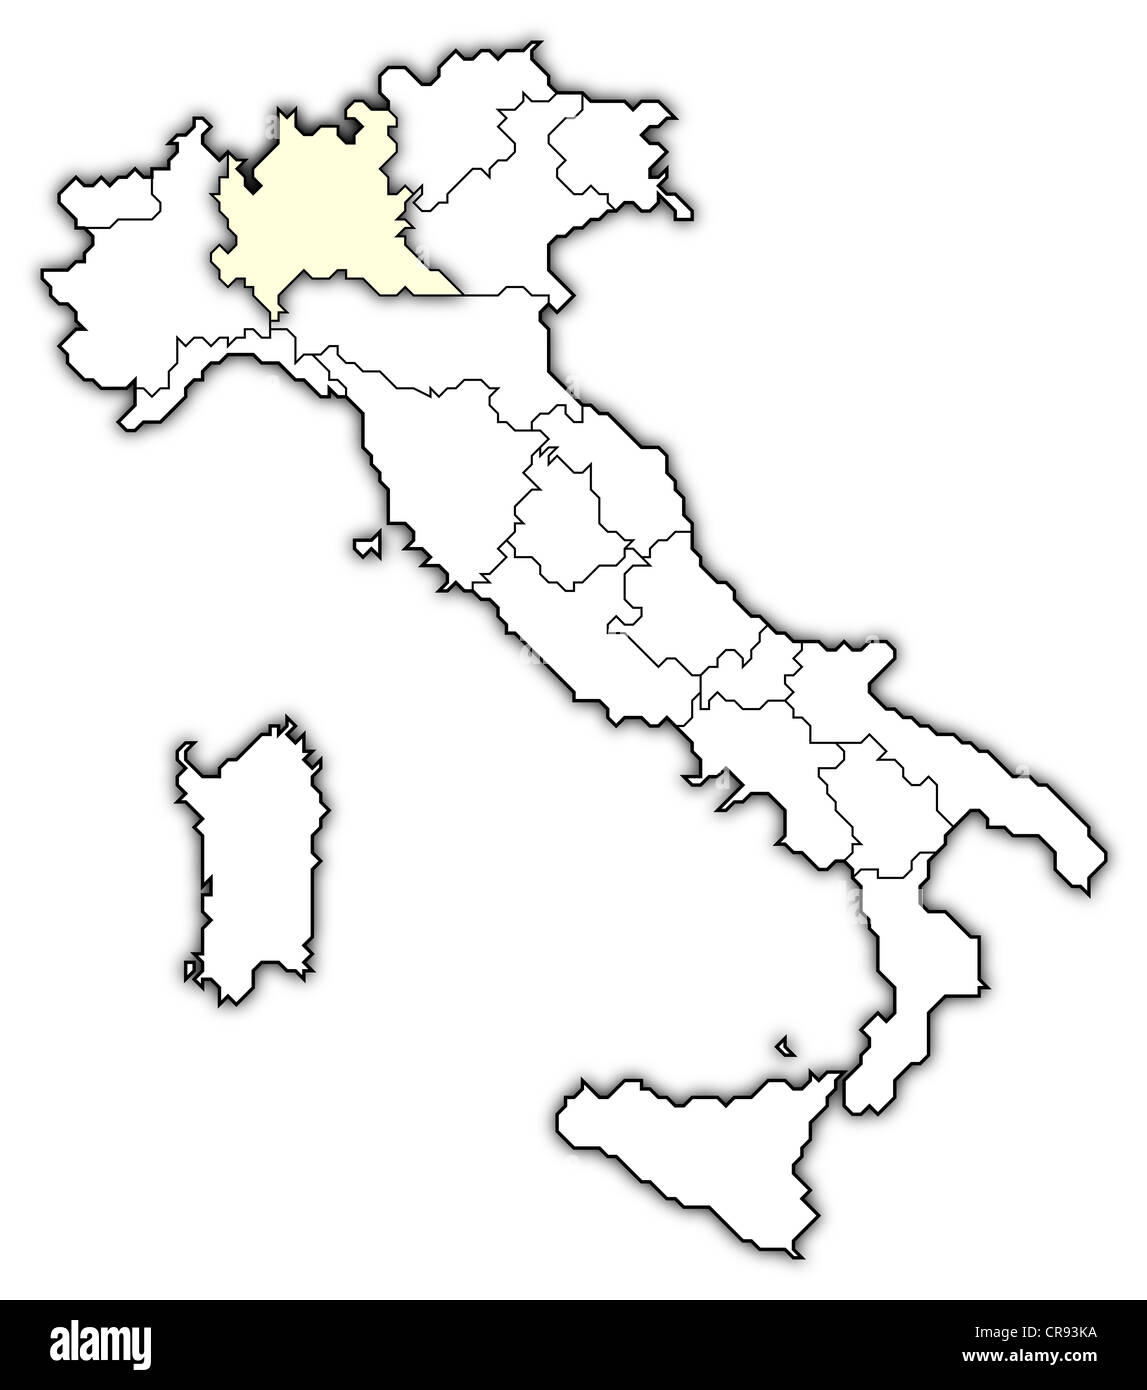 Political map of Italy with the several regions where Lombardy is highlighted. Stock Photo